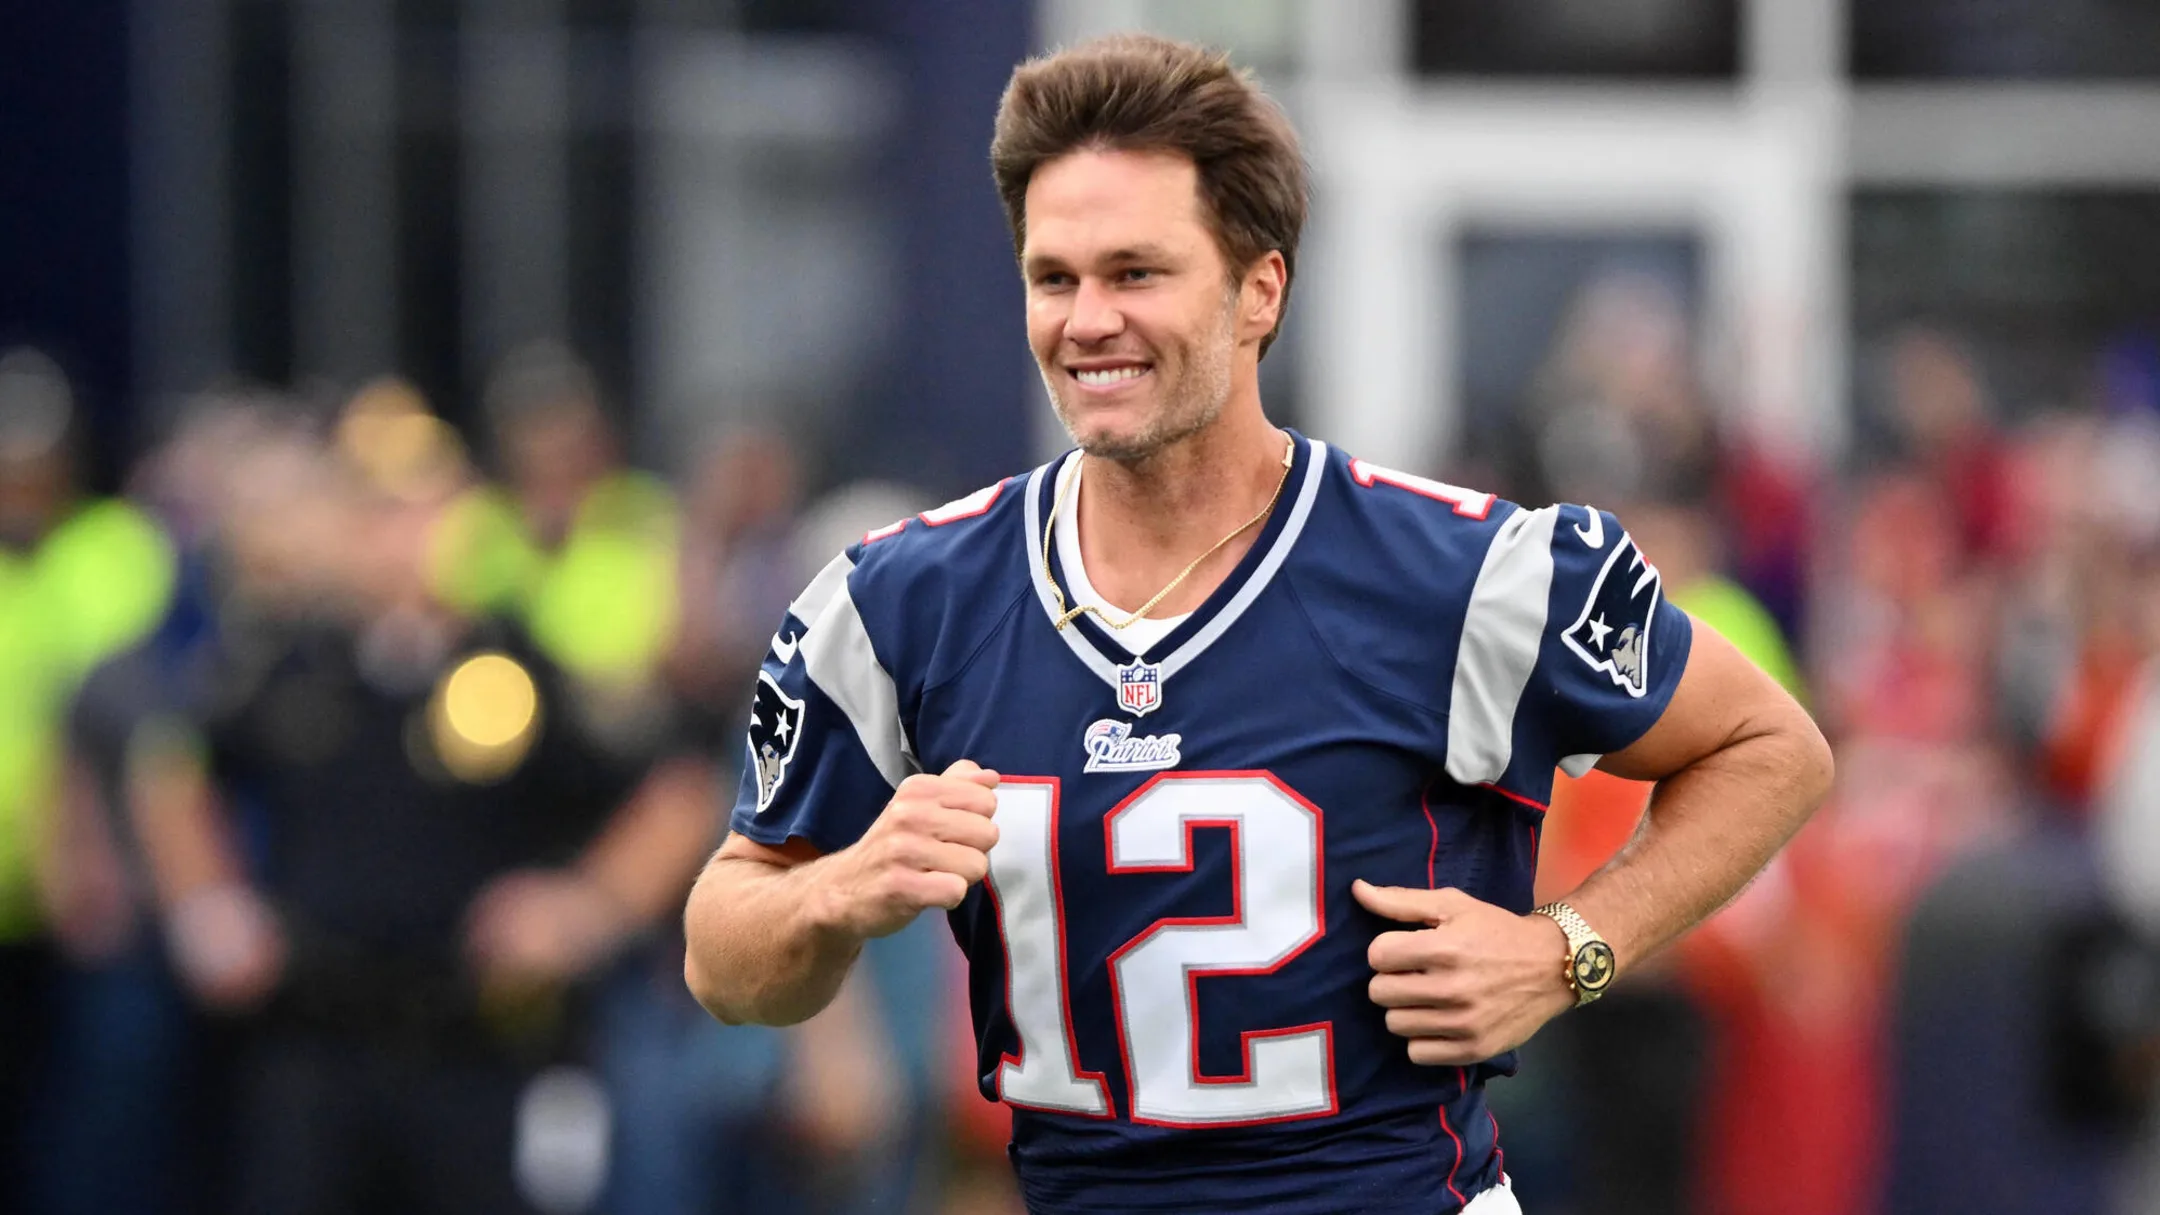  Tom Brady's Big Move: Will He Become Part Owner of the Las Vegas Raiders?